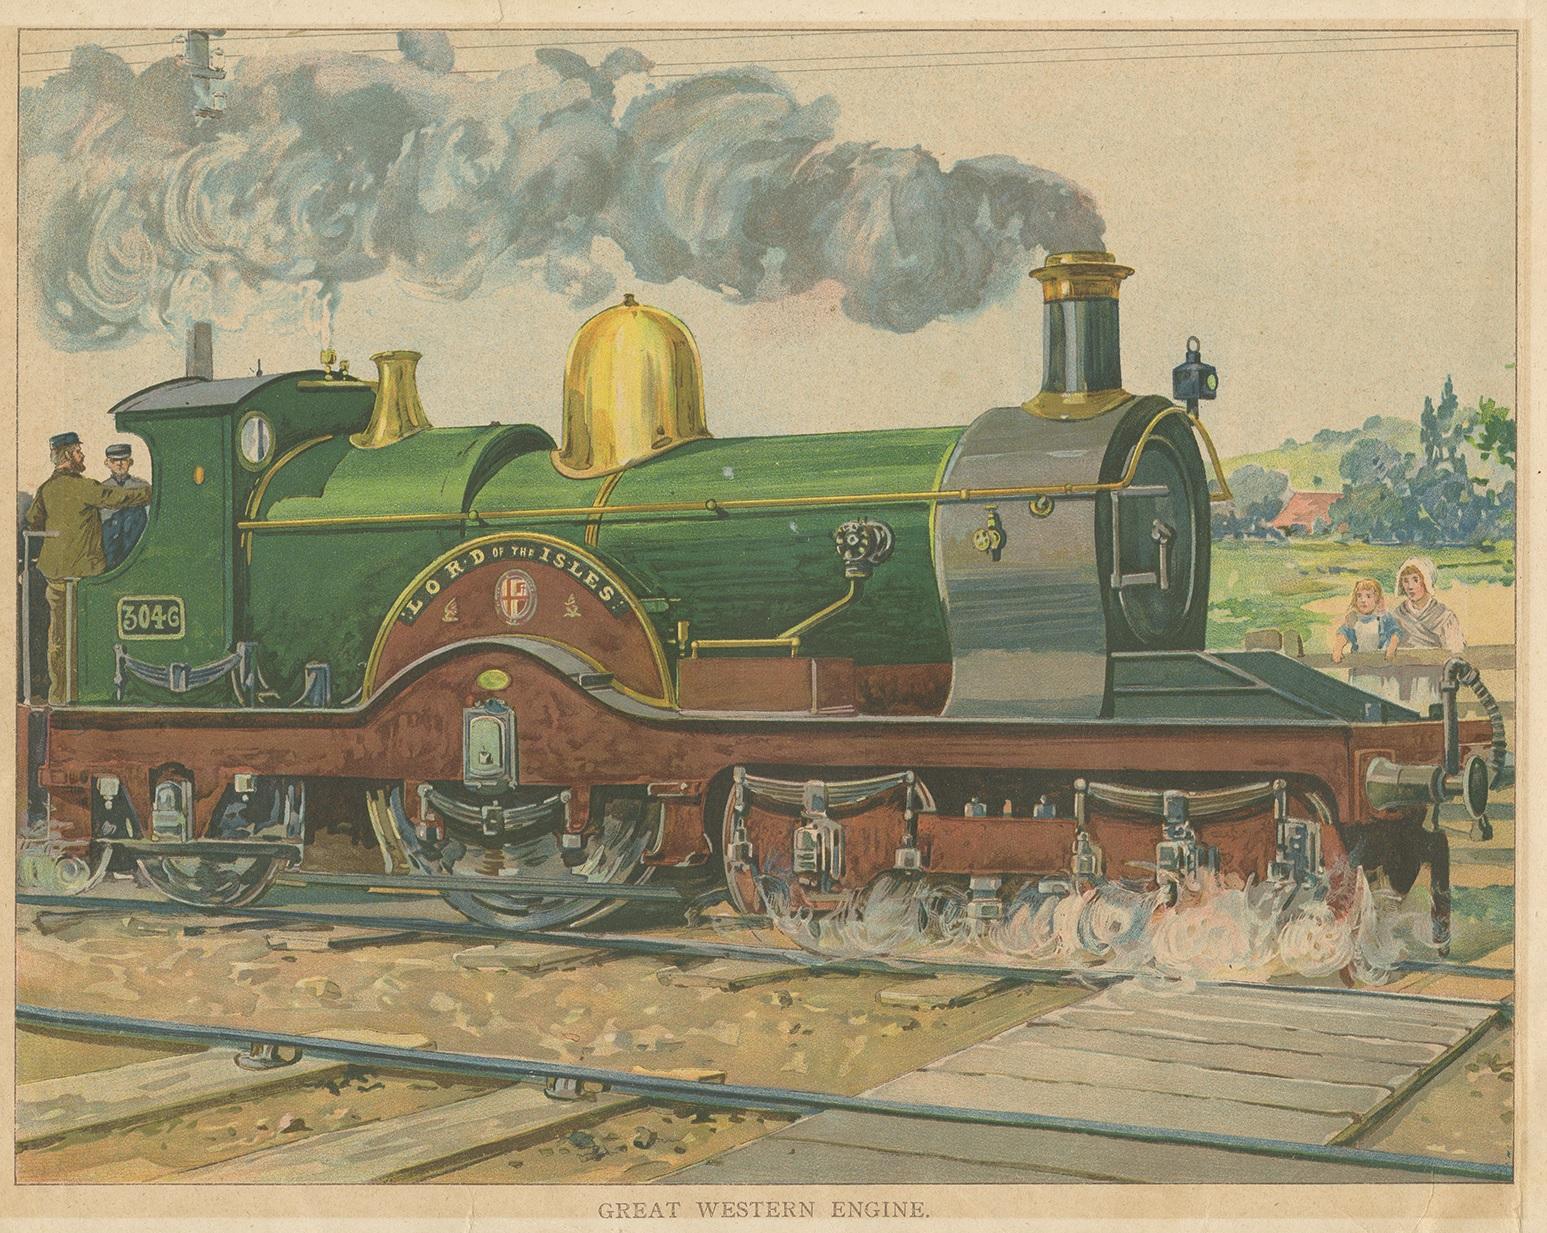 Antique print titled 'Great Western Engine'. It shows the 'Lord of the Isles' train. On the verso, an image of the New York central railway can be found. Source unknown, to be determined.